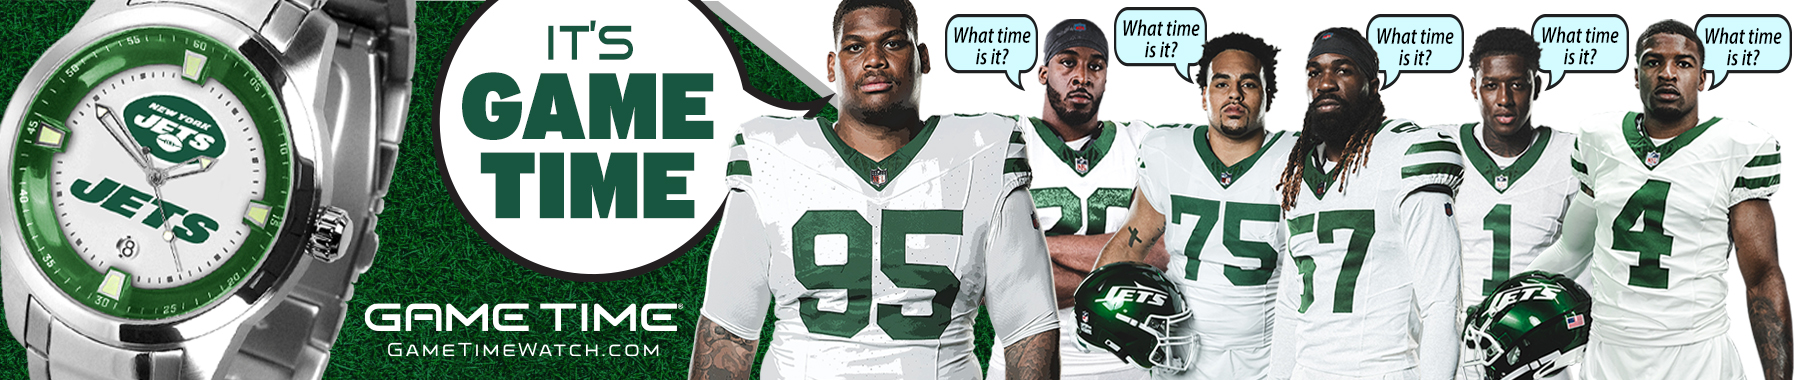 Game Time NYJ 1800x380 Banner r03